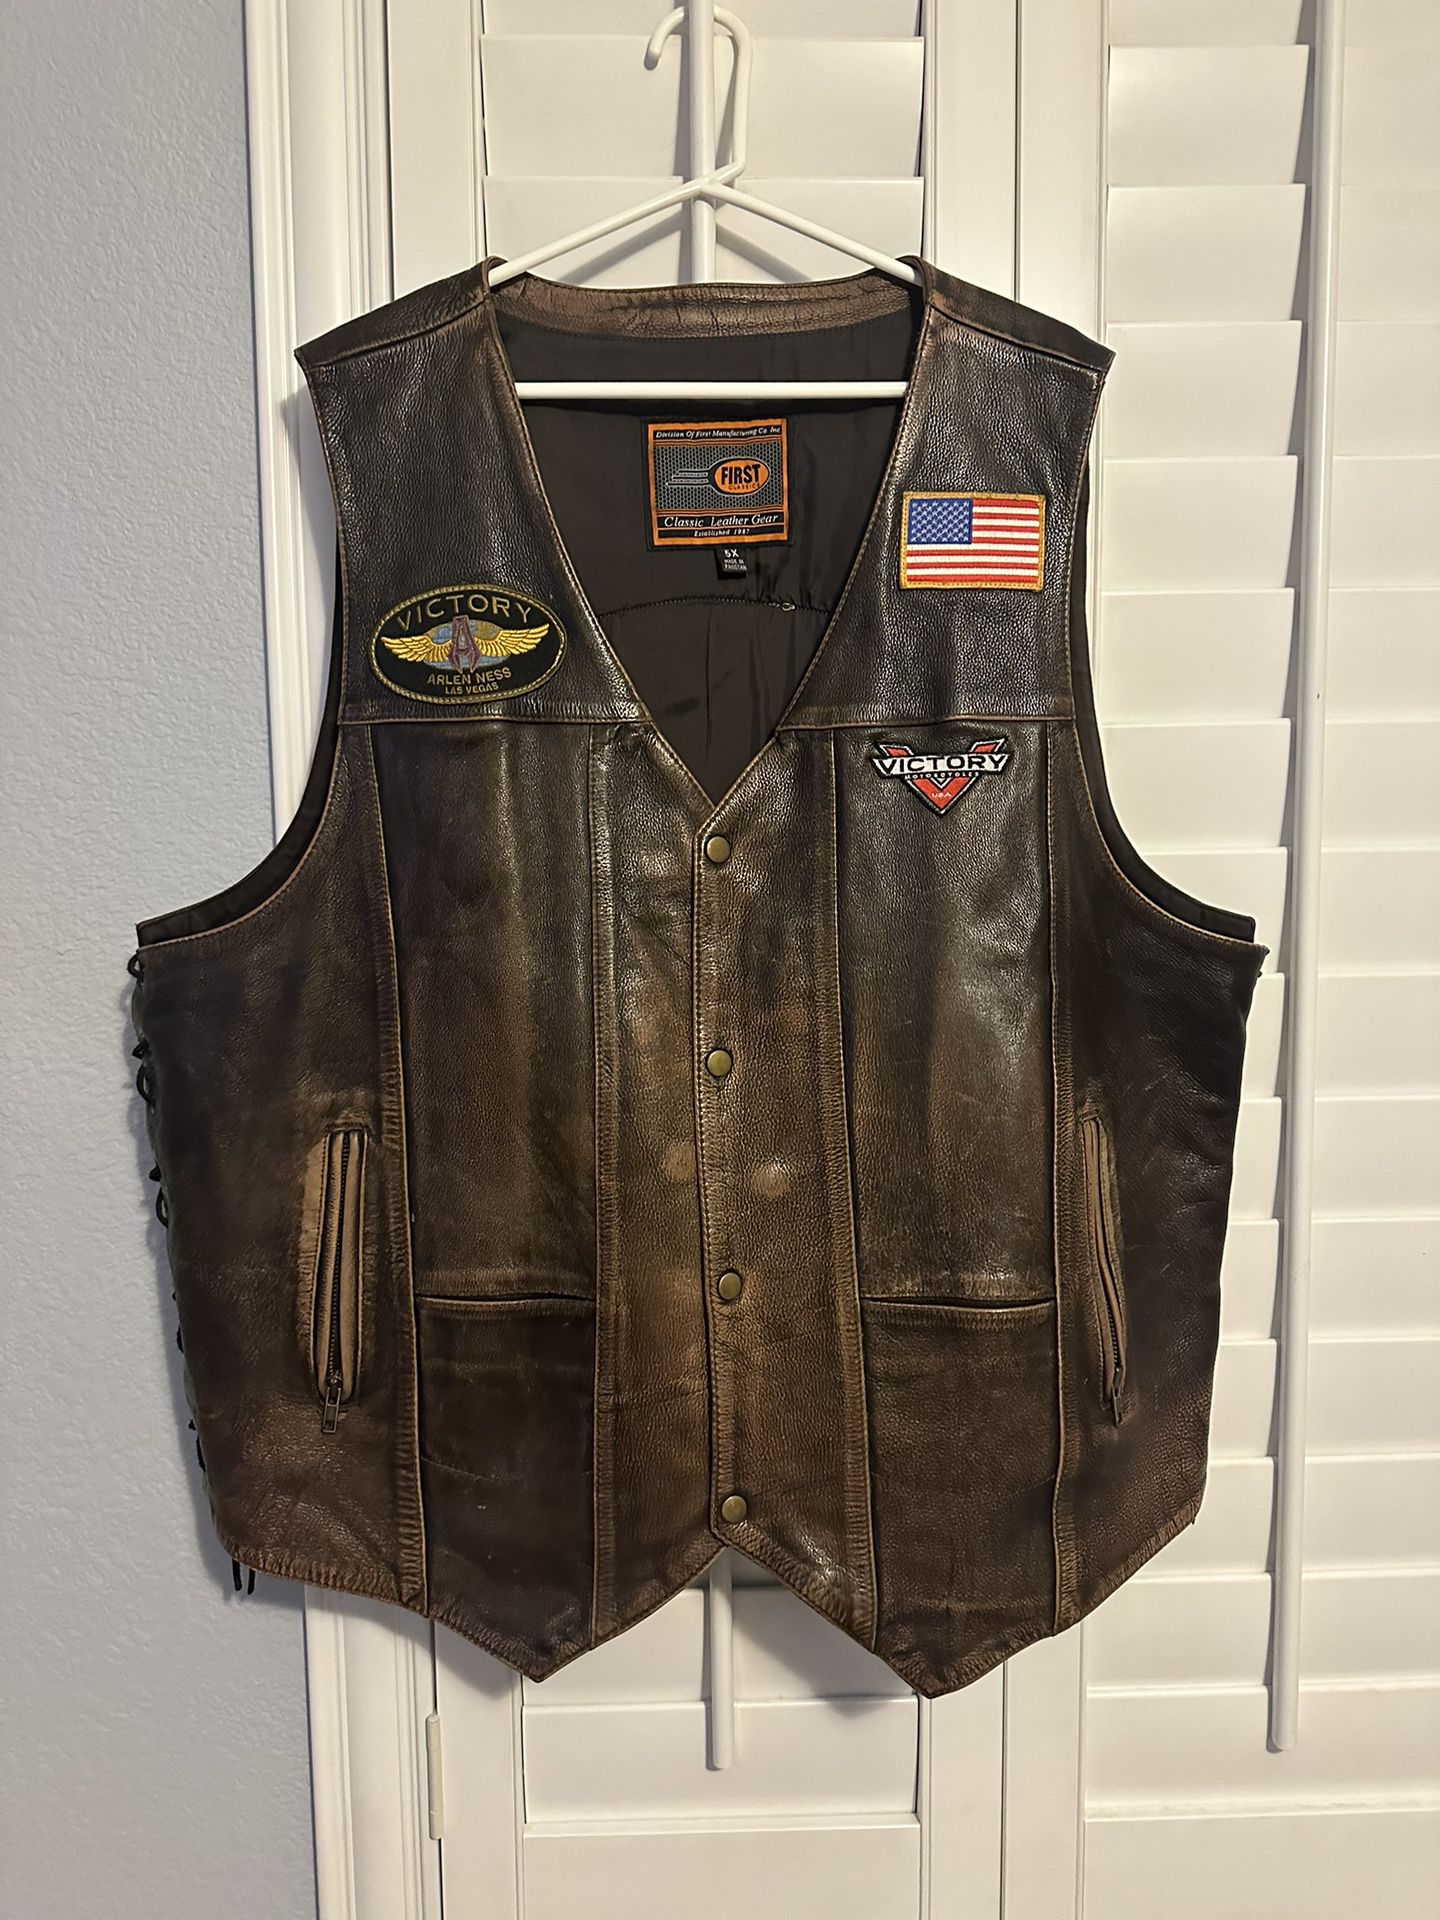 VTG RETRO 90s VICTORY MOTORCYCLES BROWN LEATHER VEST BUTTON UP SIZE 5X FITS XXL